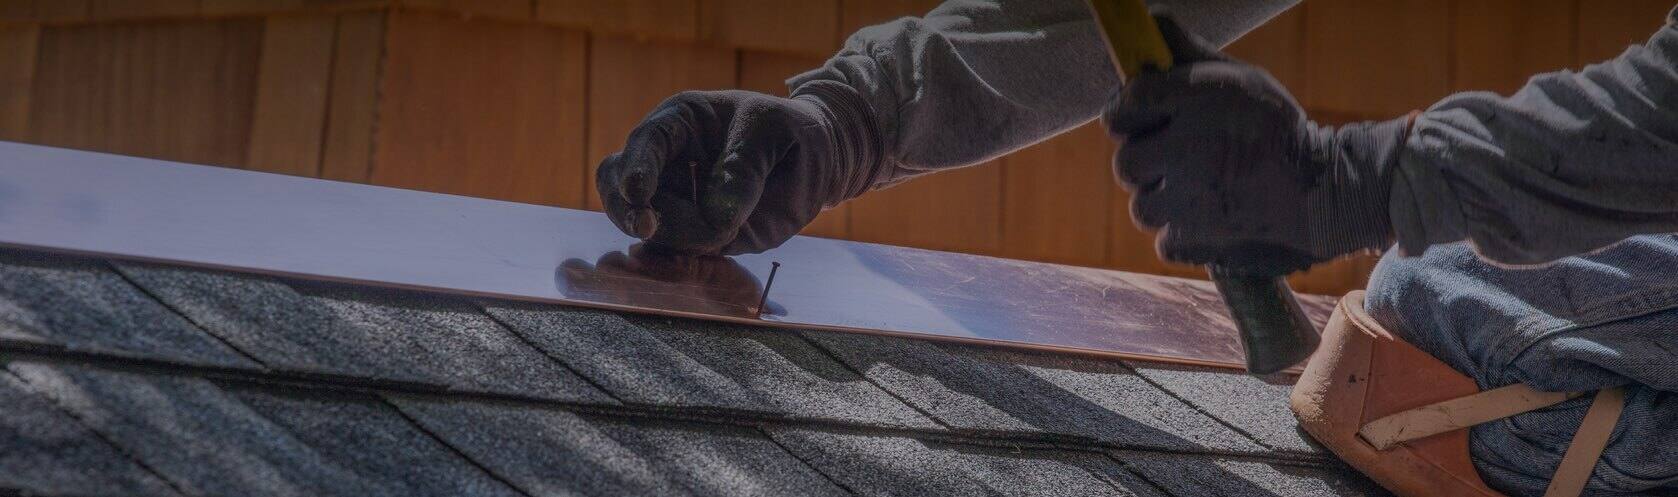 Top-rated roofing work.